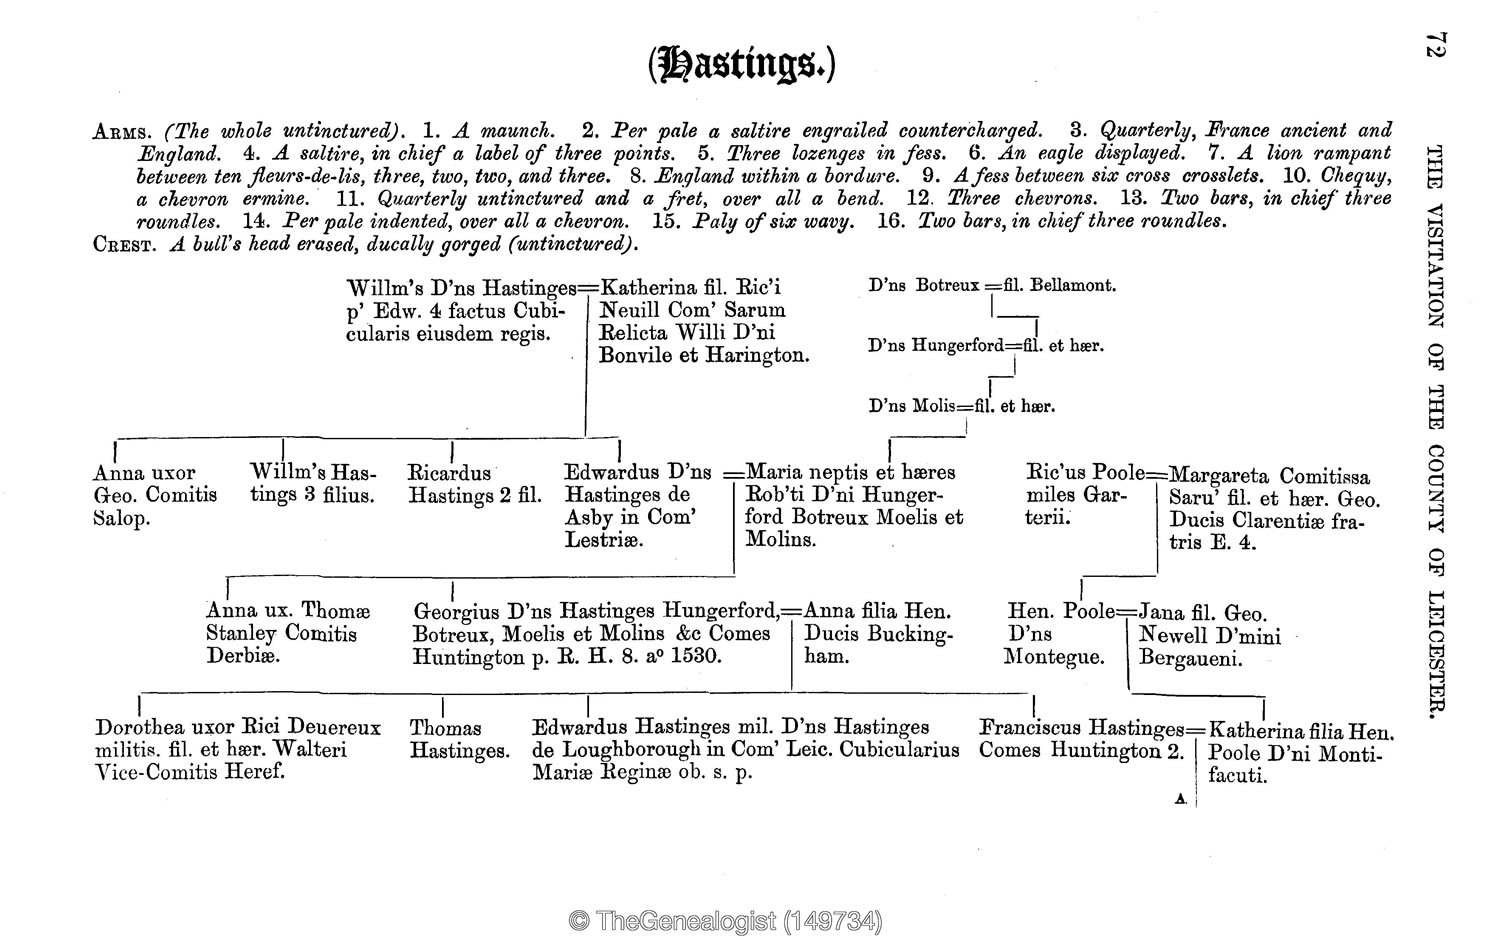 Pedigree of the Hastings family from the 1619 Leicestershire Visitations on TheGenealogist